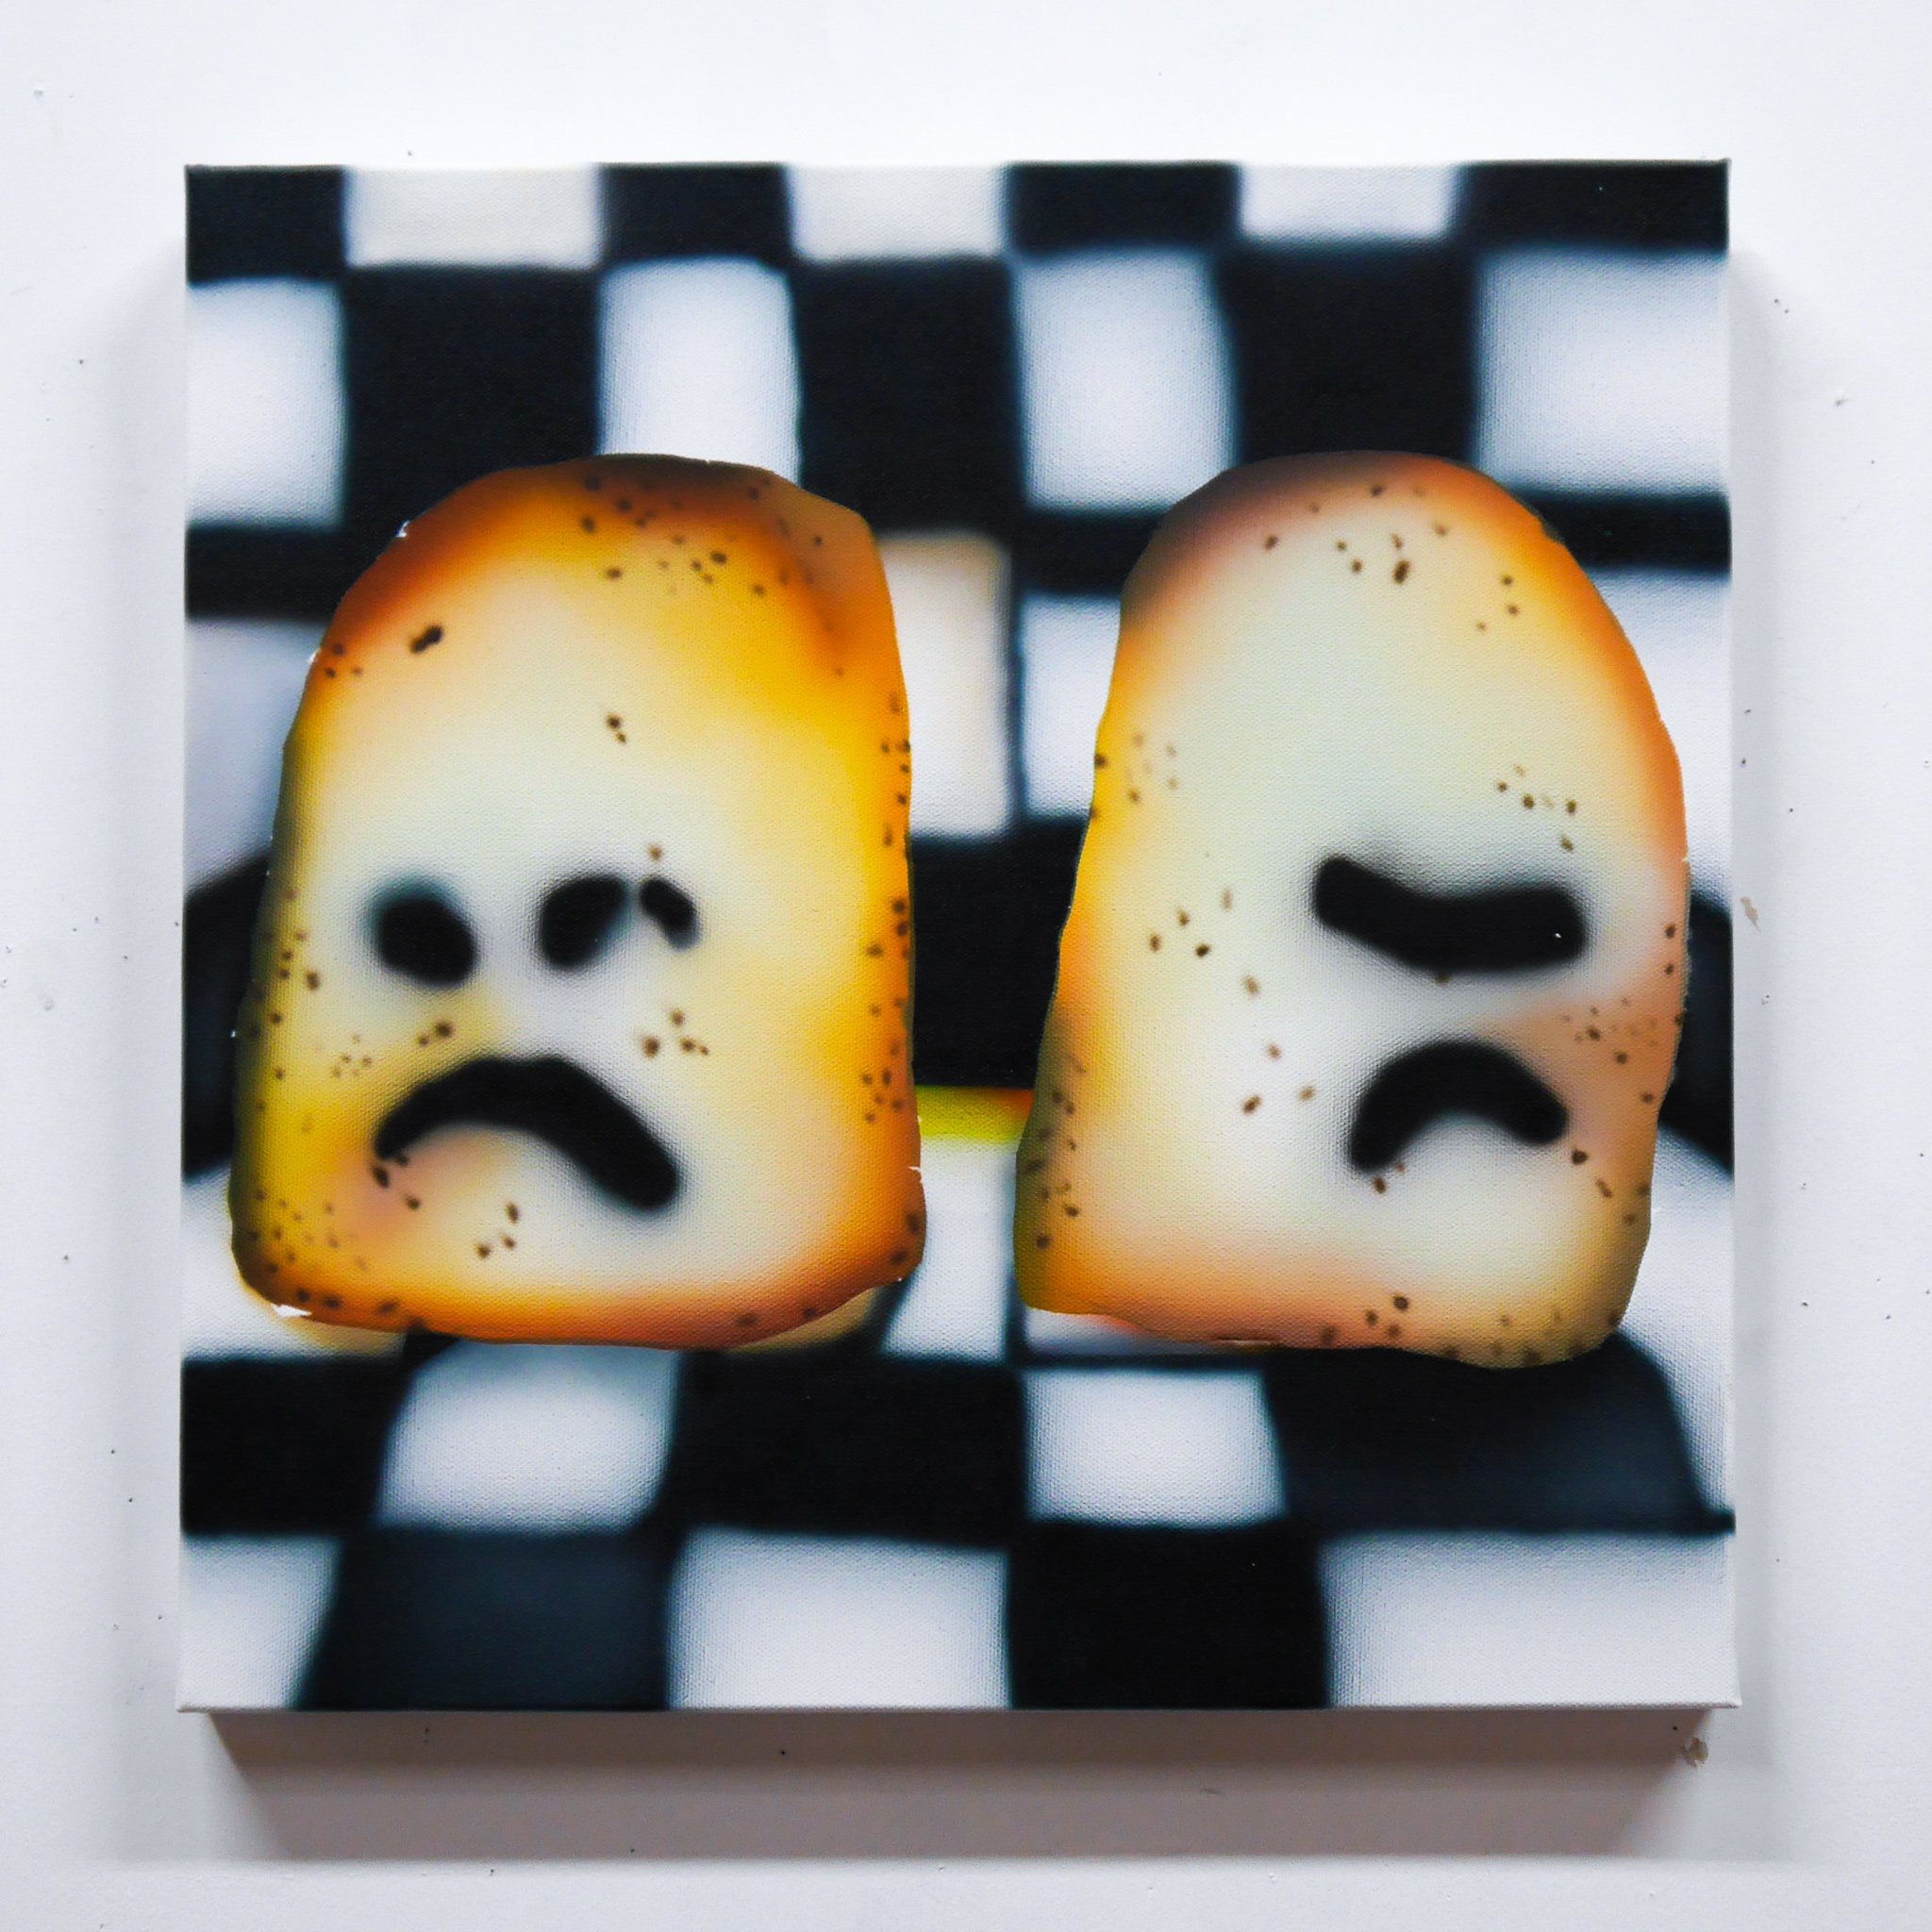  “unkind bread I”, acrylic on canvas, 20 x 20 x 1.5 inches, 2022 